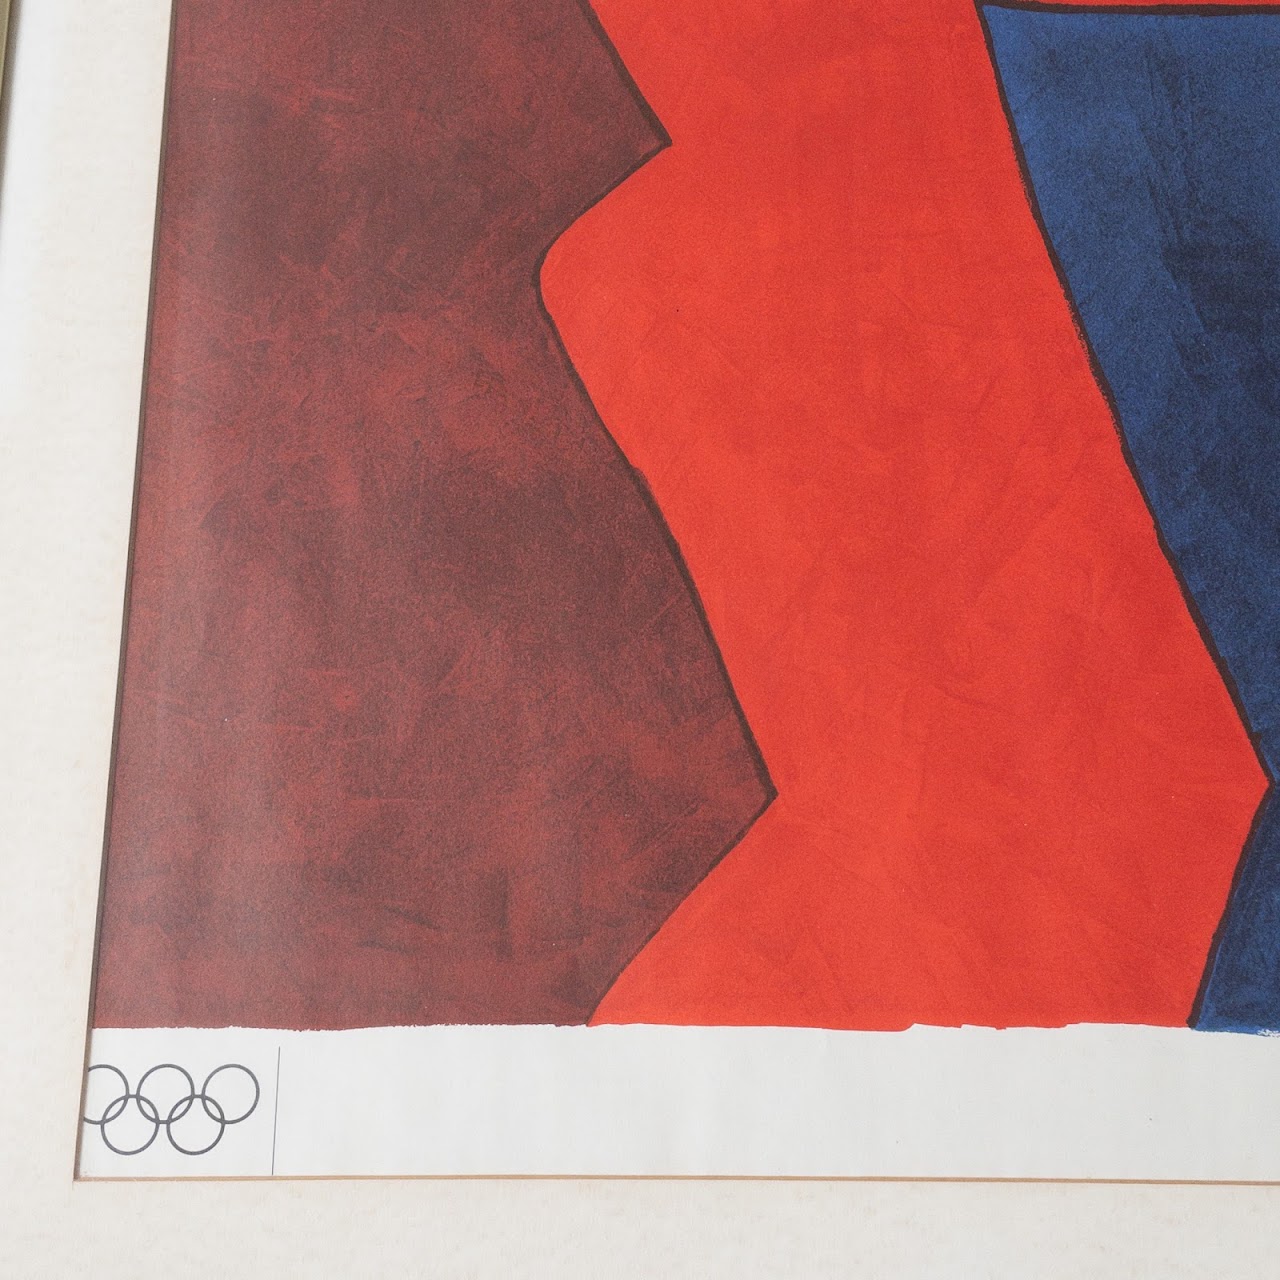 After Sergei Poliakoff 1972 Munich Olympic Games Poster